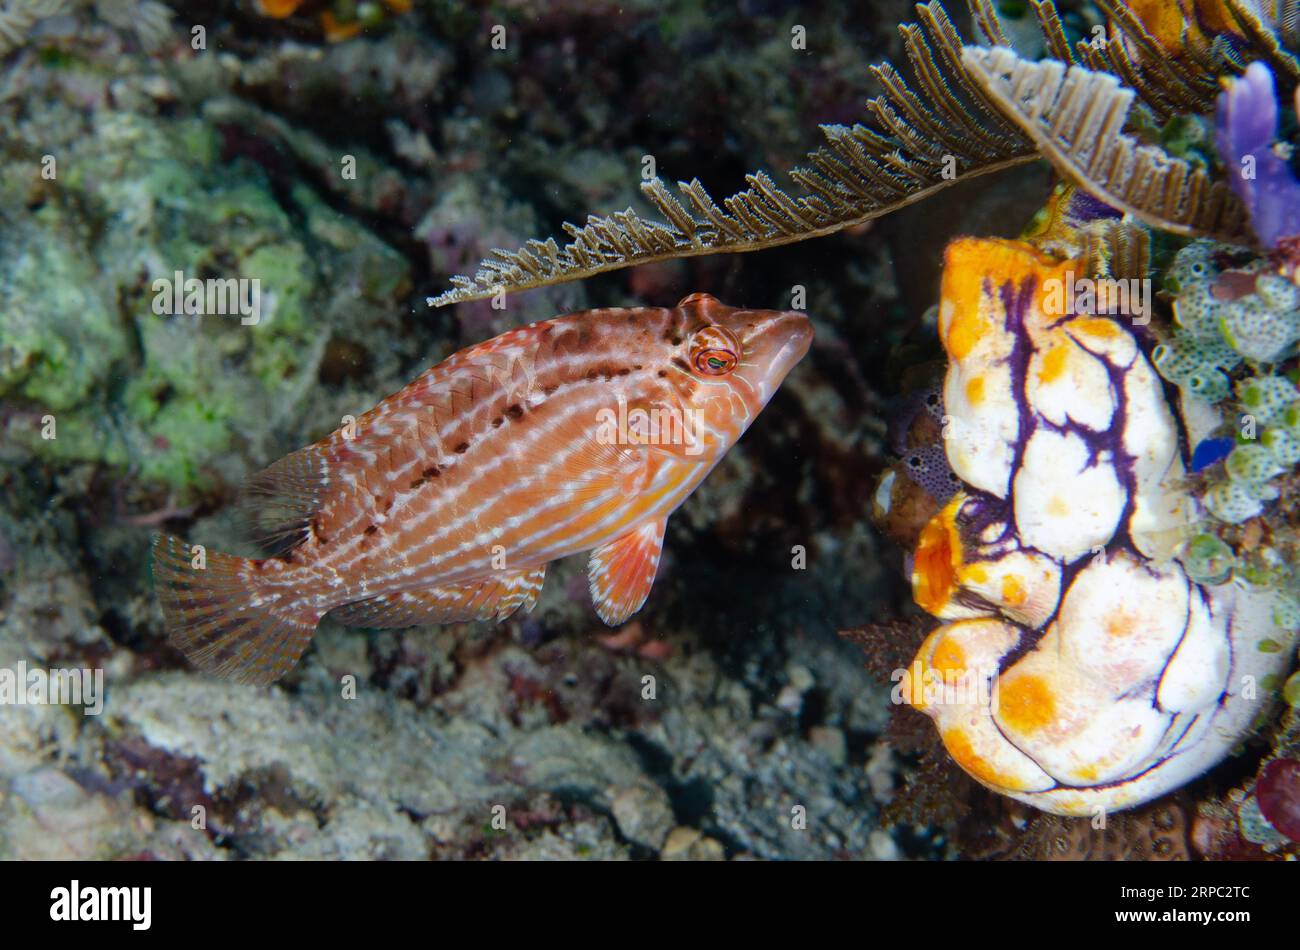 Cockerel Wrasse, Pteragogus enneacanthus, by Golden Sea Squirt, Polycarpa aurata, Murex House Reef dive site, Bangka Island, north Sulawesi, Indonesia Stock Photo